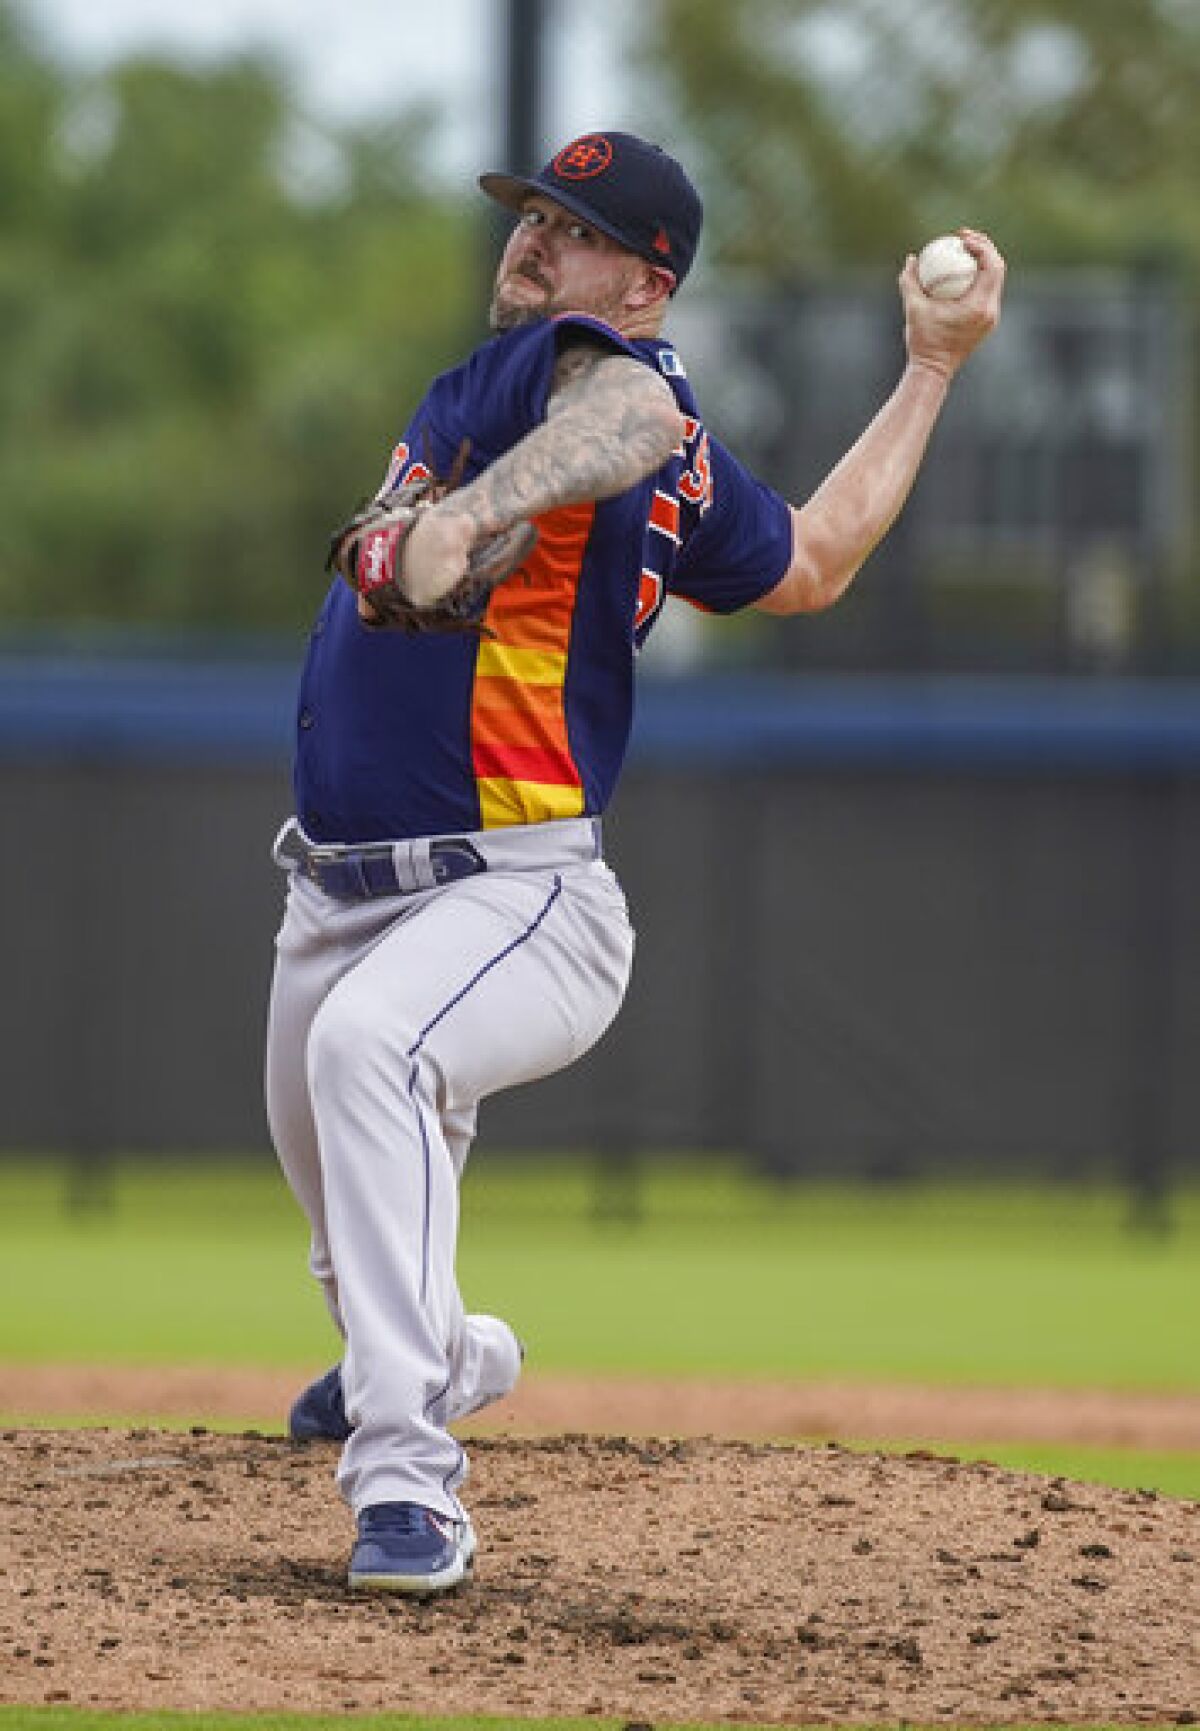 Houston Astros pitcher Ryan Pressly pitches during a minor league game against the Washington Nationals minor leaguers on the back fields at The Ballpark of the Palm Beaches facility on Thursday, March 24, 2022 in West Palm Beach, Fla. (Karen Warren/Houston Chronicle via AP)